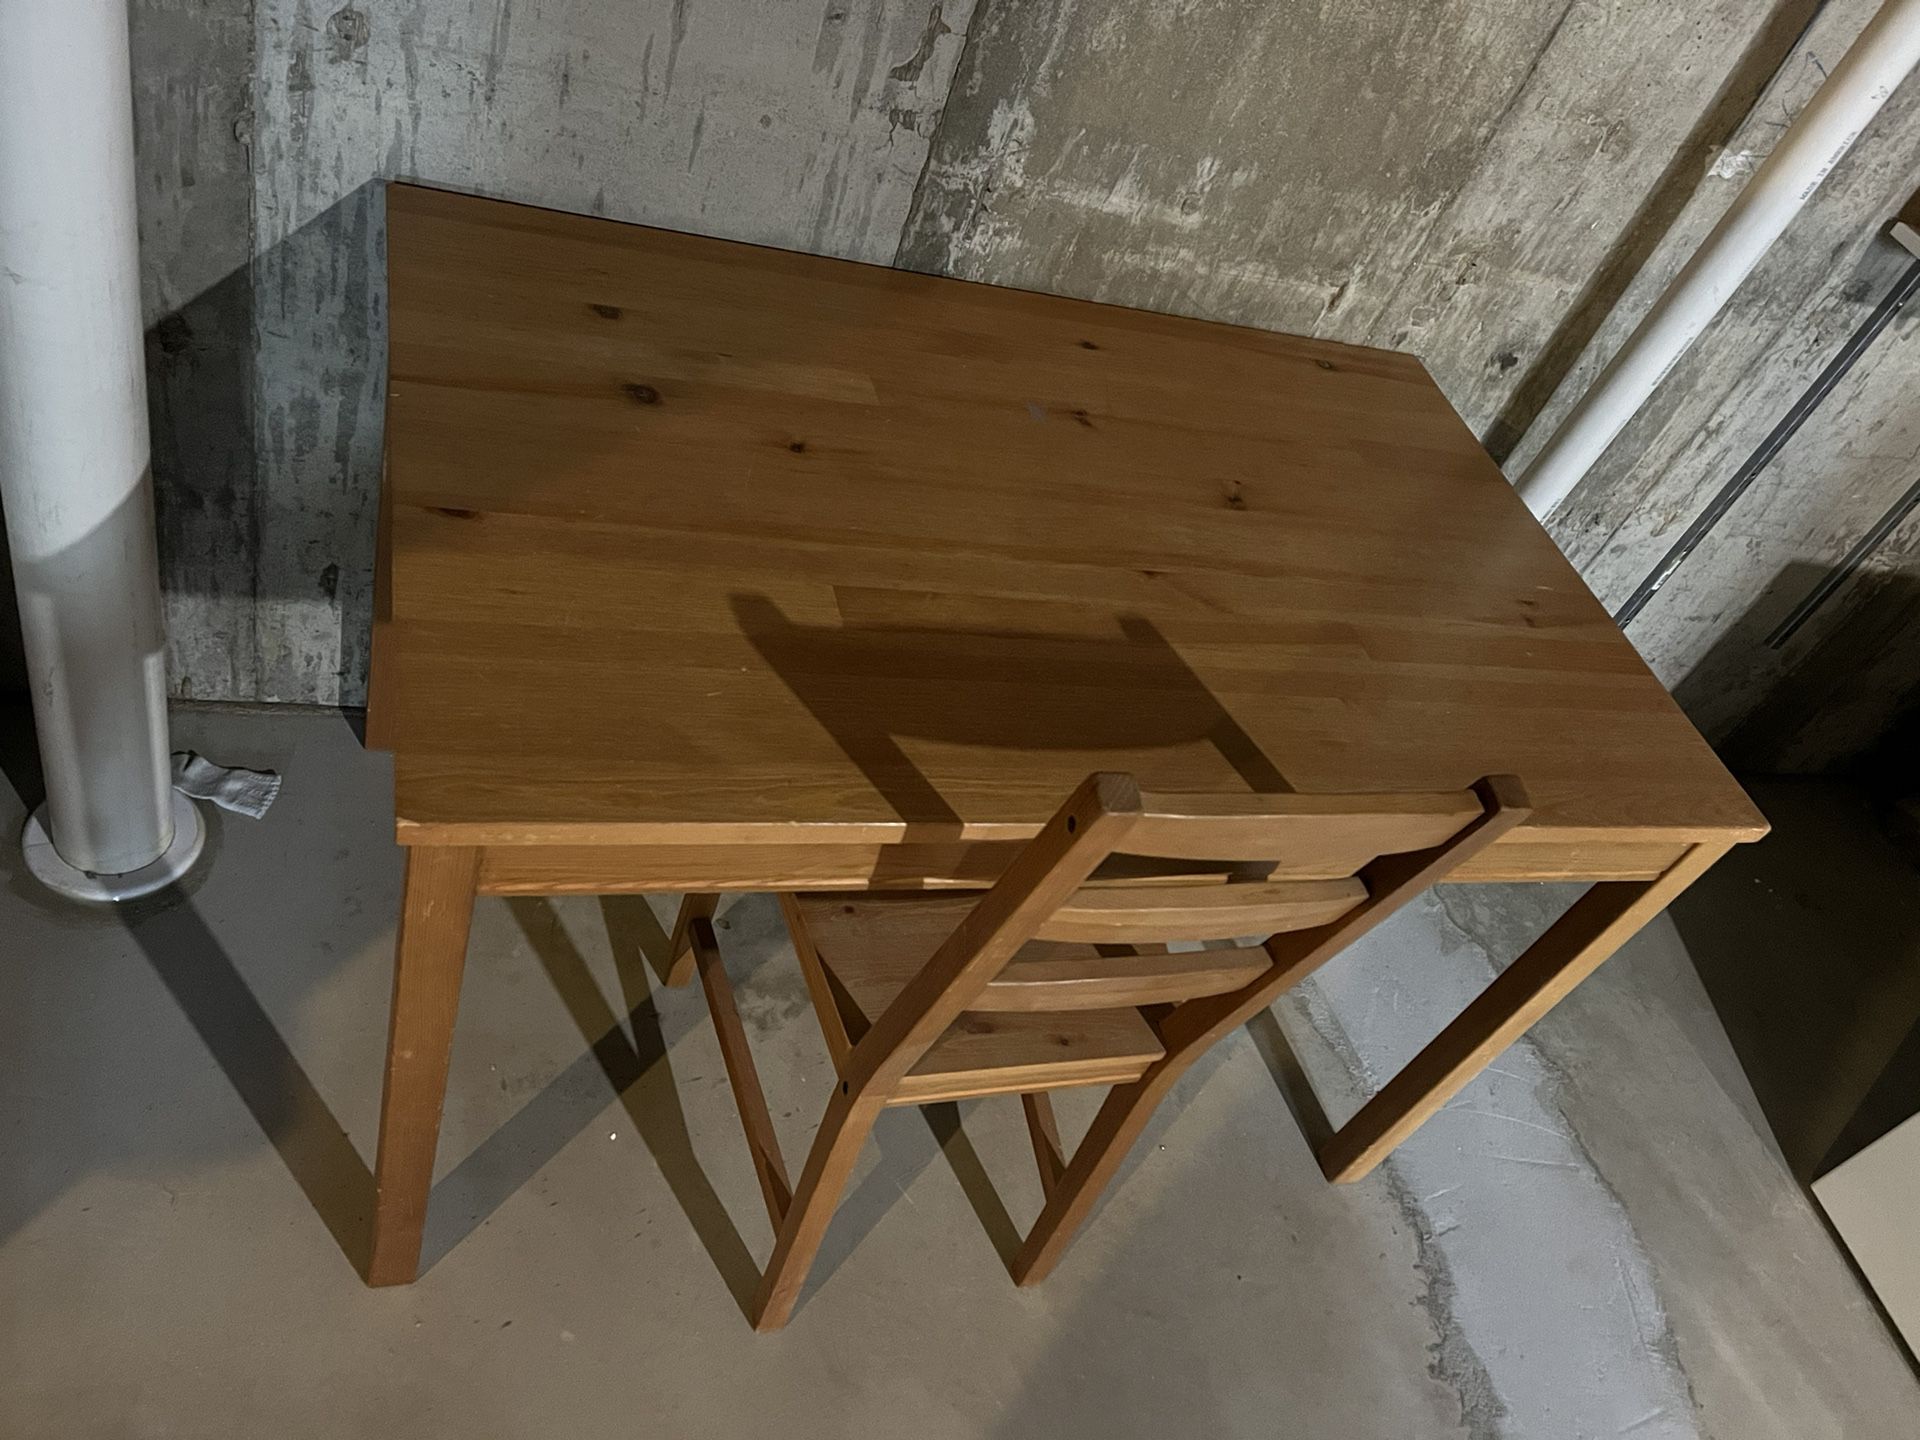 IKEA Desk/Table With Chair